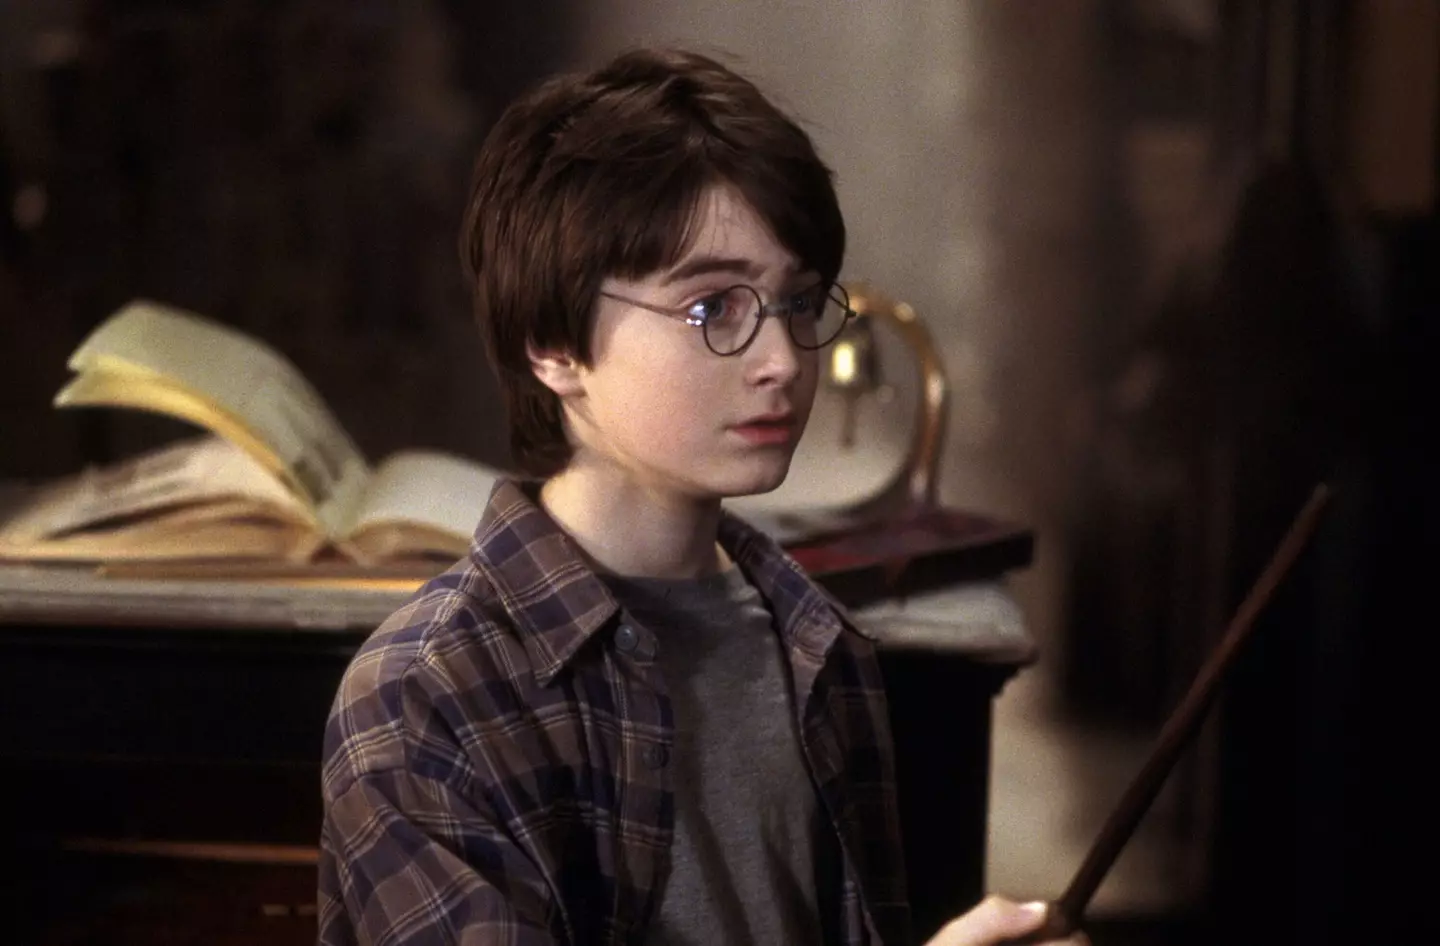 Daniel Radcliffe in the first Harry Potter film.